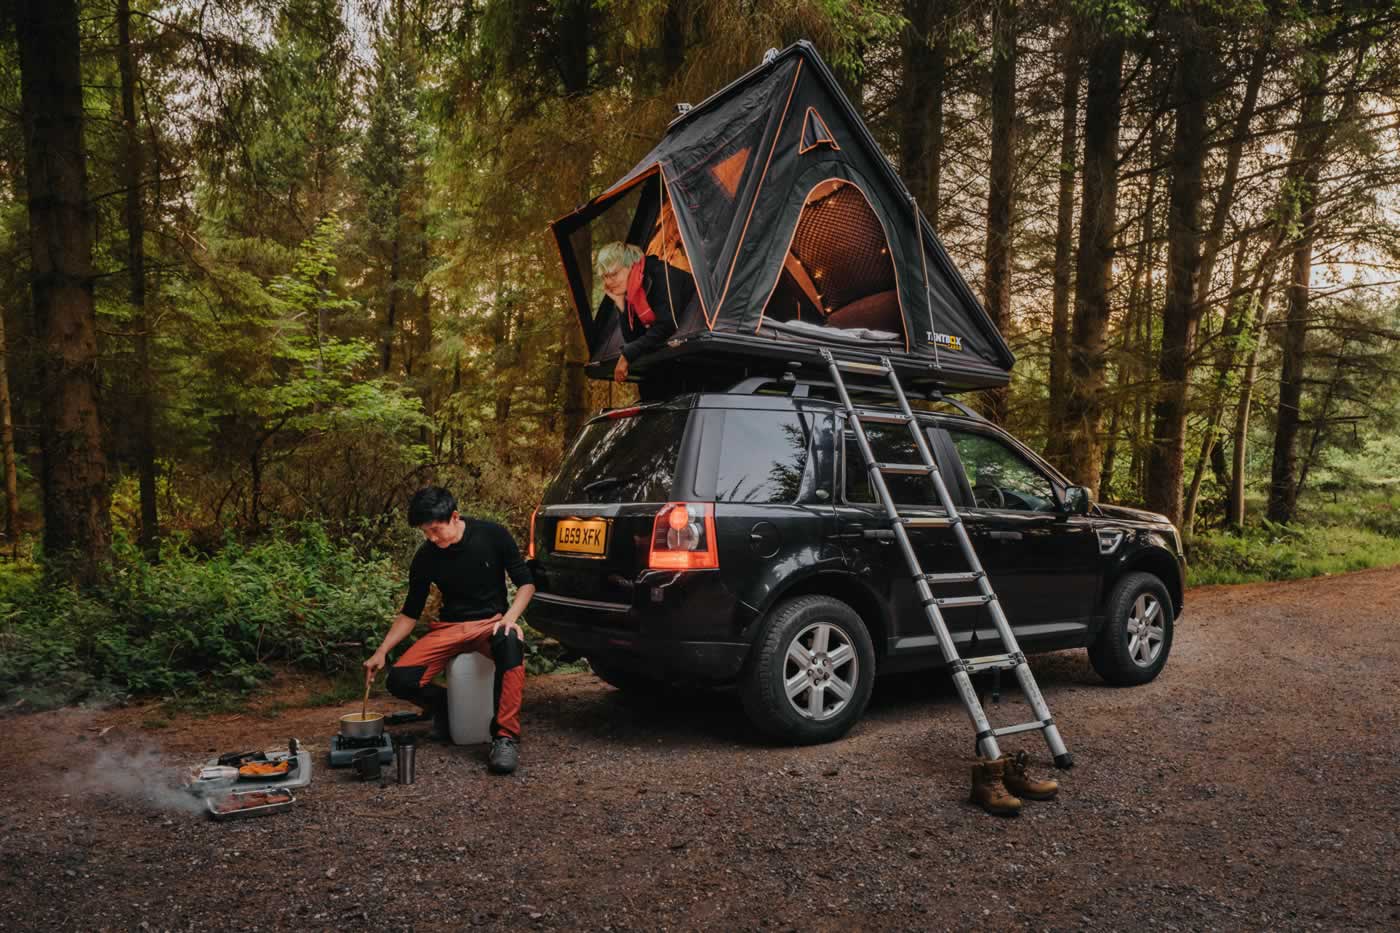 Tentbox Cargo. This tentbox cargo roof tent is built to be rugged and can handle anything from weekend trips to hardcore adventures.